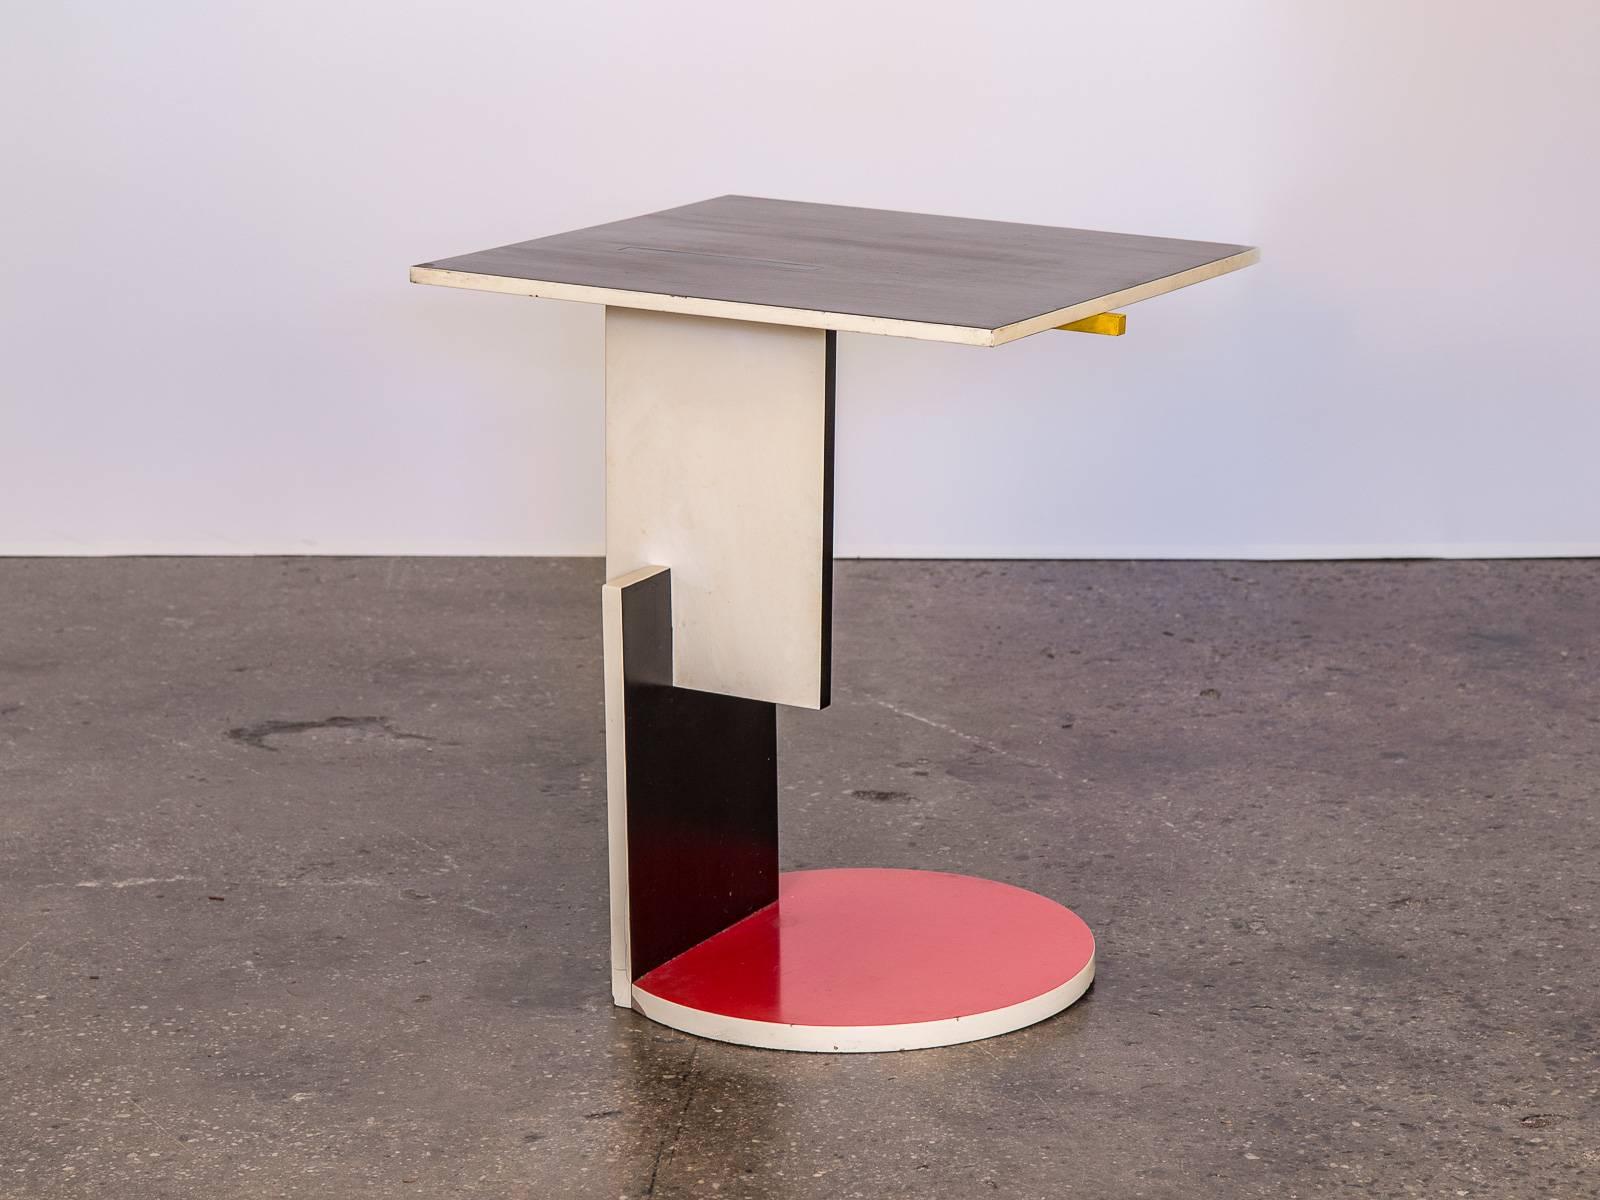 Asymmetrical table by Dutch designer and architect Gerrit Rietveld. Created alongside his 1924 Schroeder House, this side table follows the primary color palate and geometric cubist form of De Stijl design. Our table is about thirty years old, one